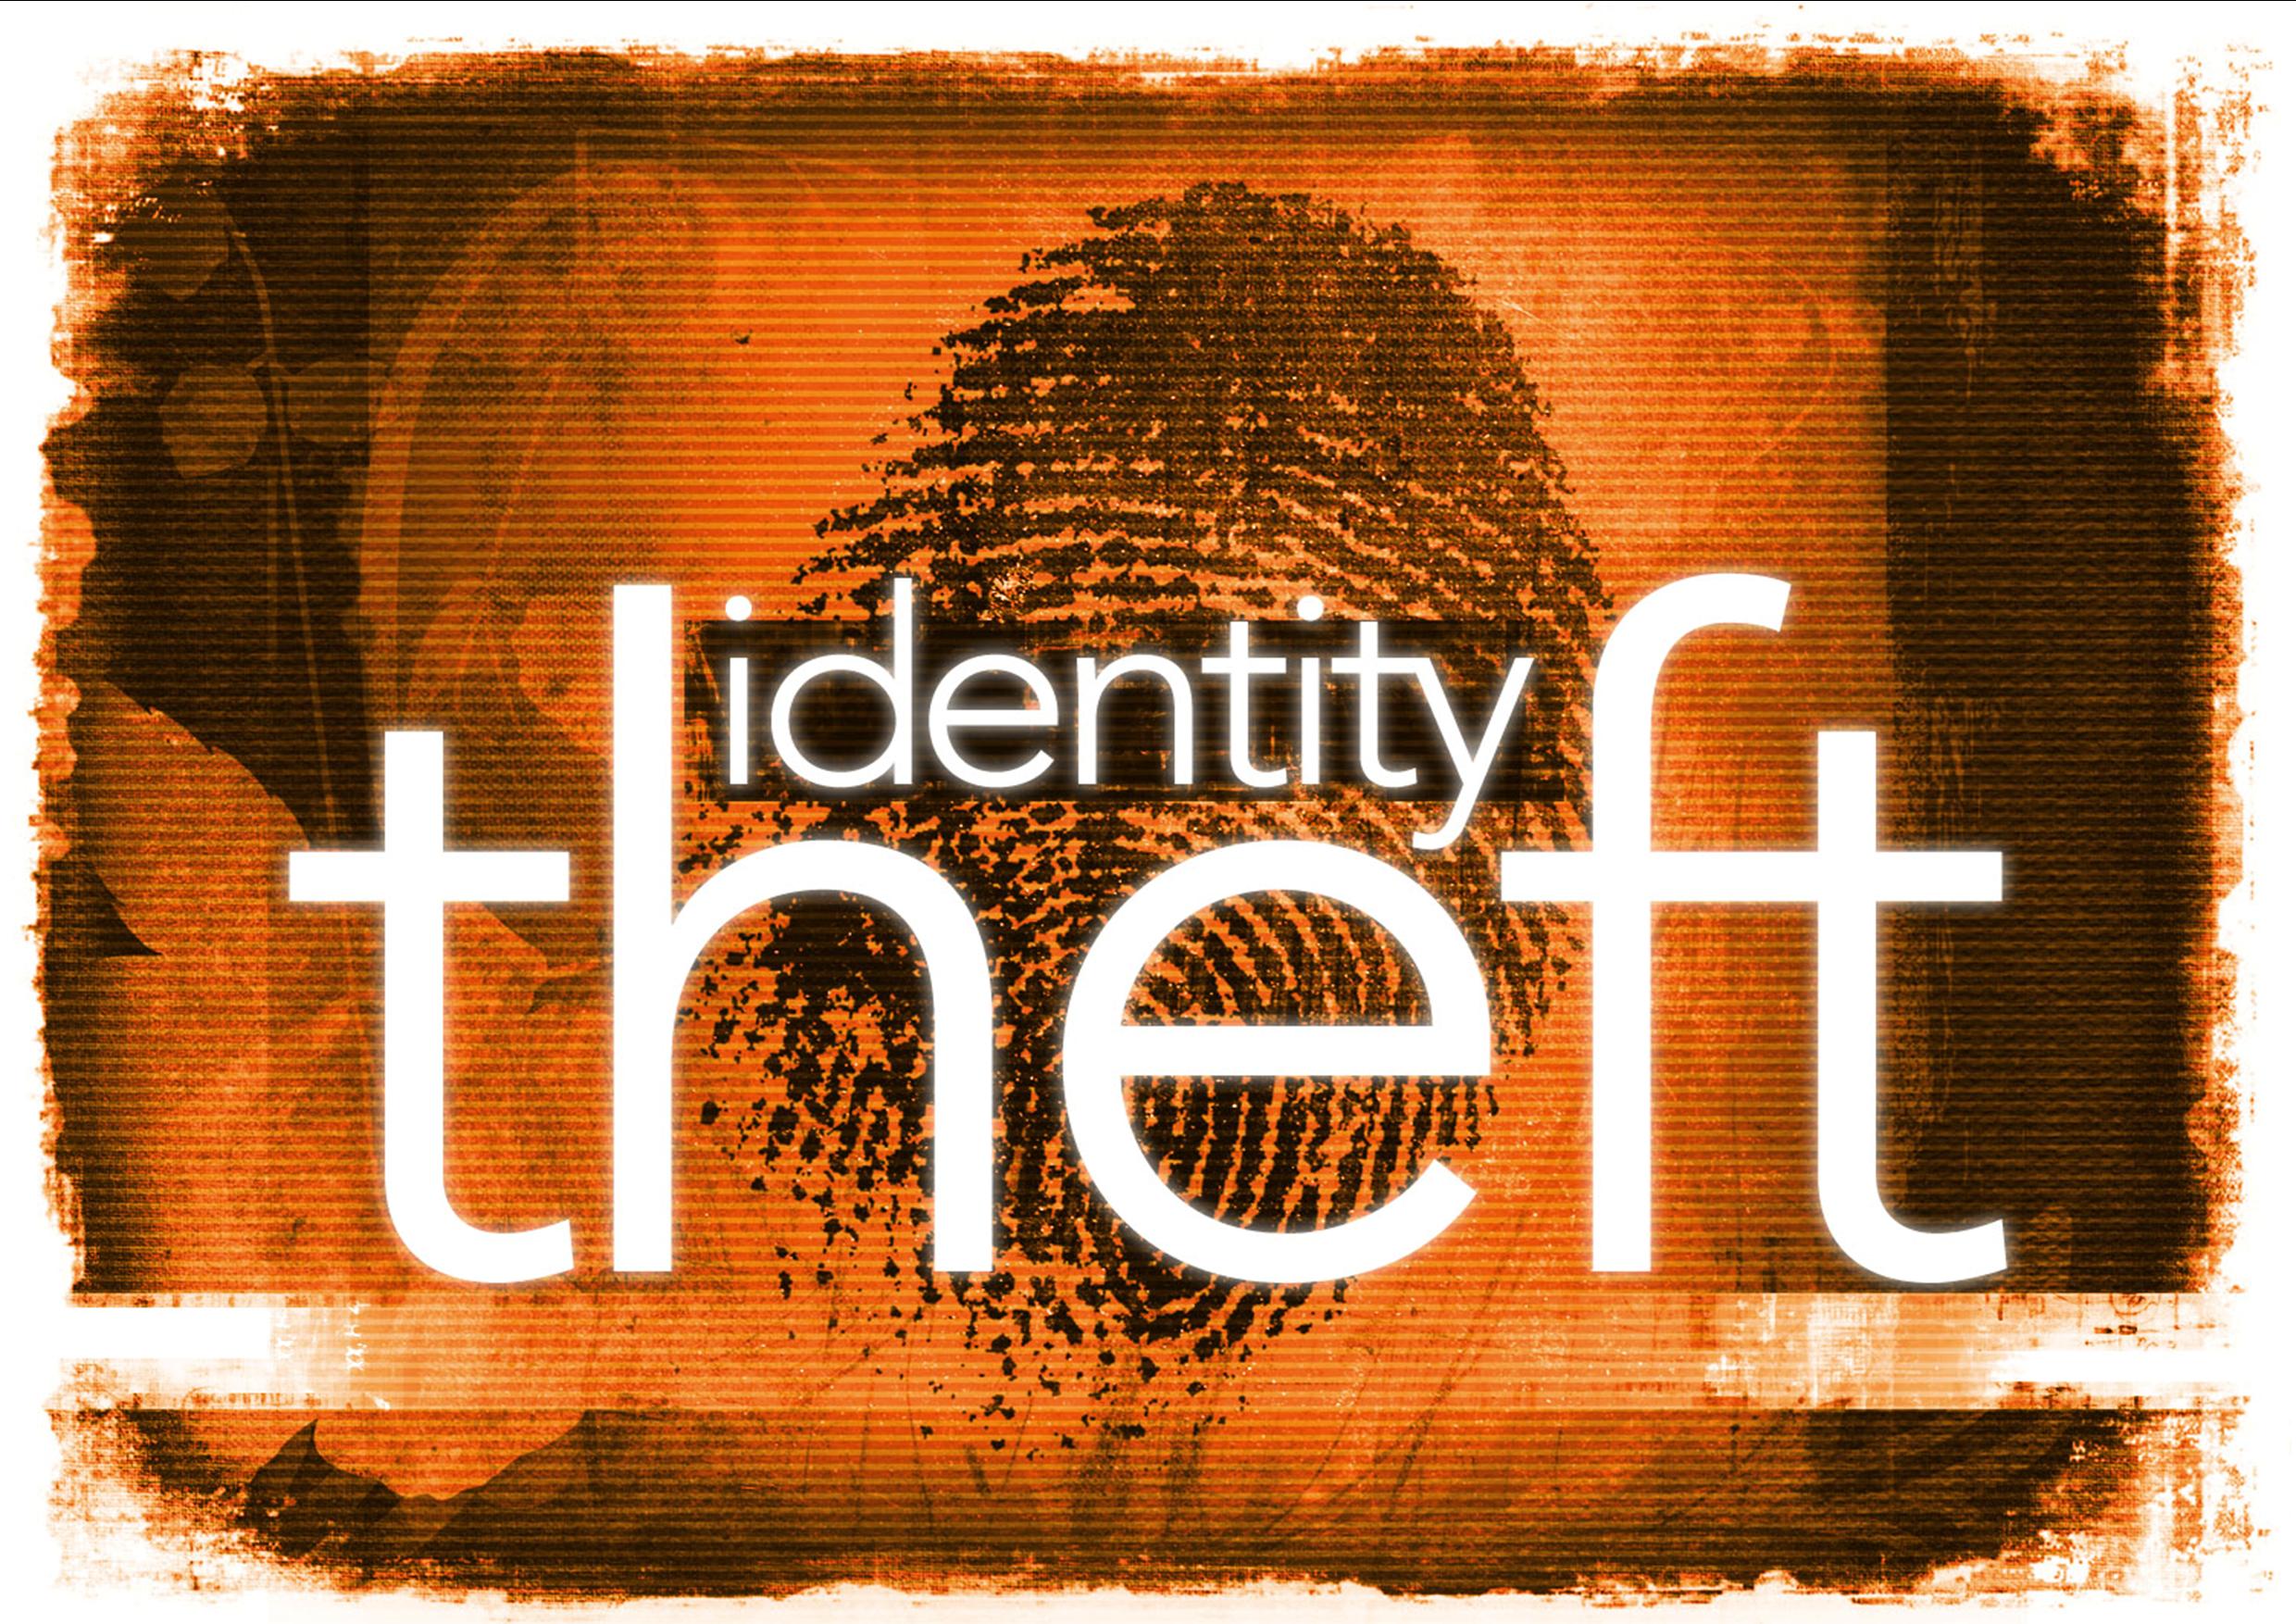 Identity Theft: Most Common Fraud Complaint Received